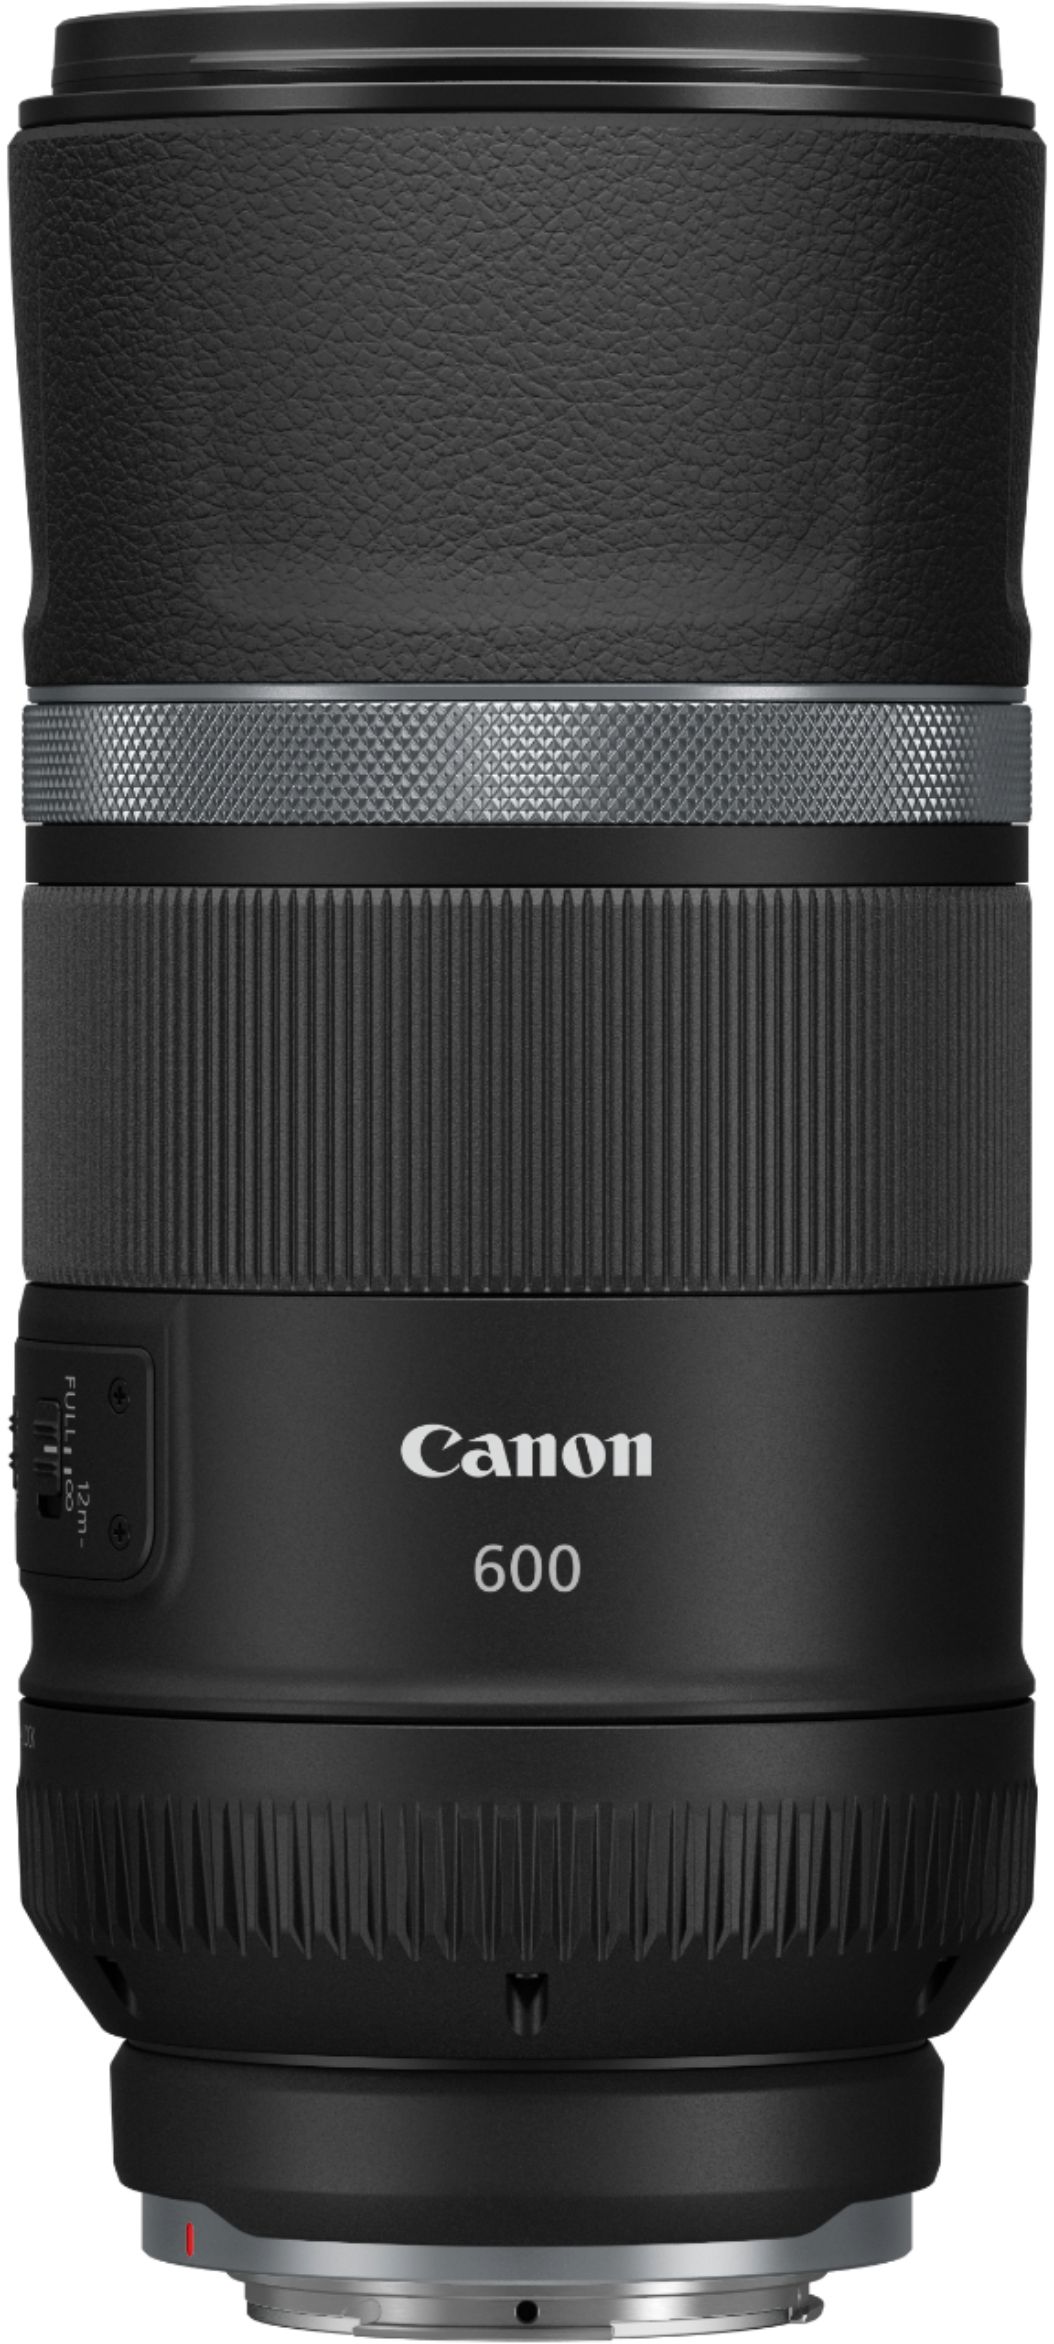 Back View: Canon - RF600mm F11 IS STM Telephoto Lens for EOS R-Series Cameras - Black